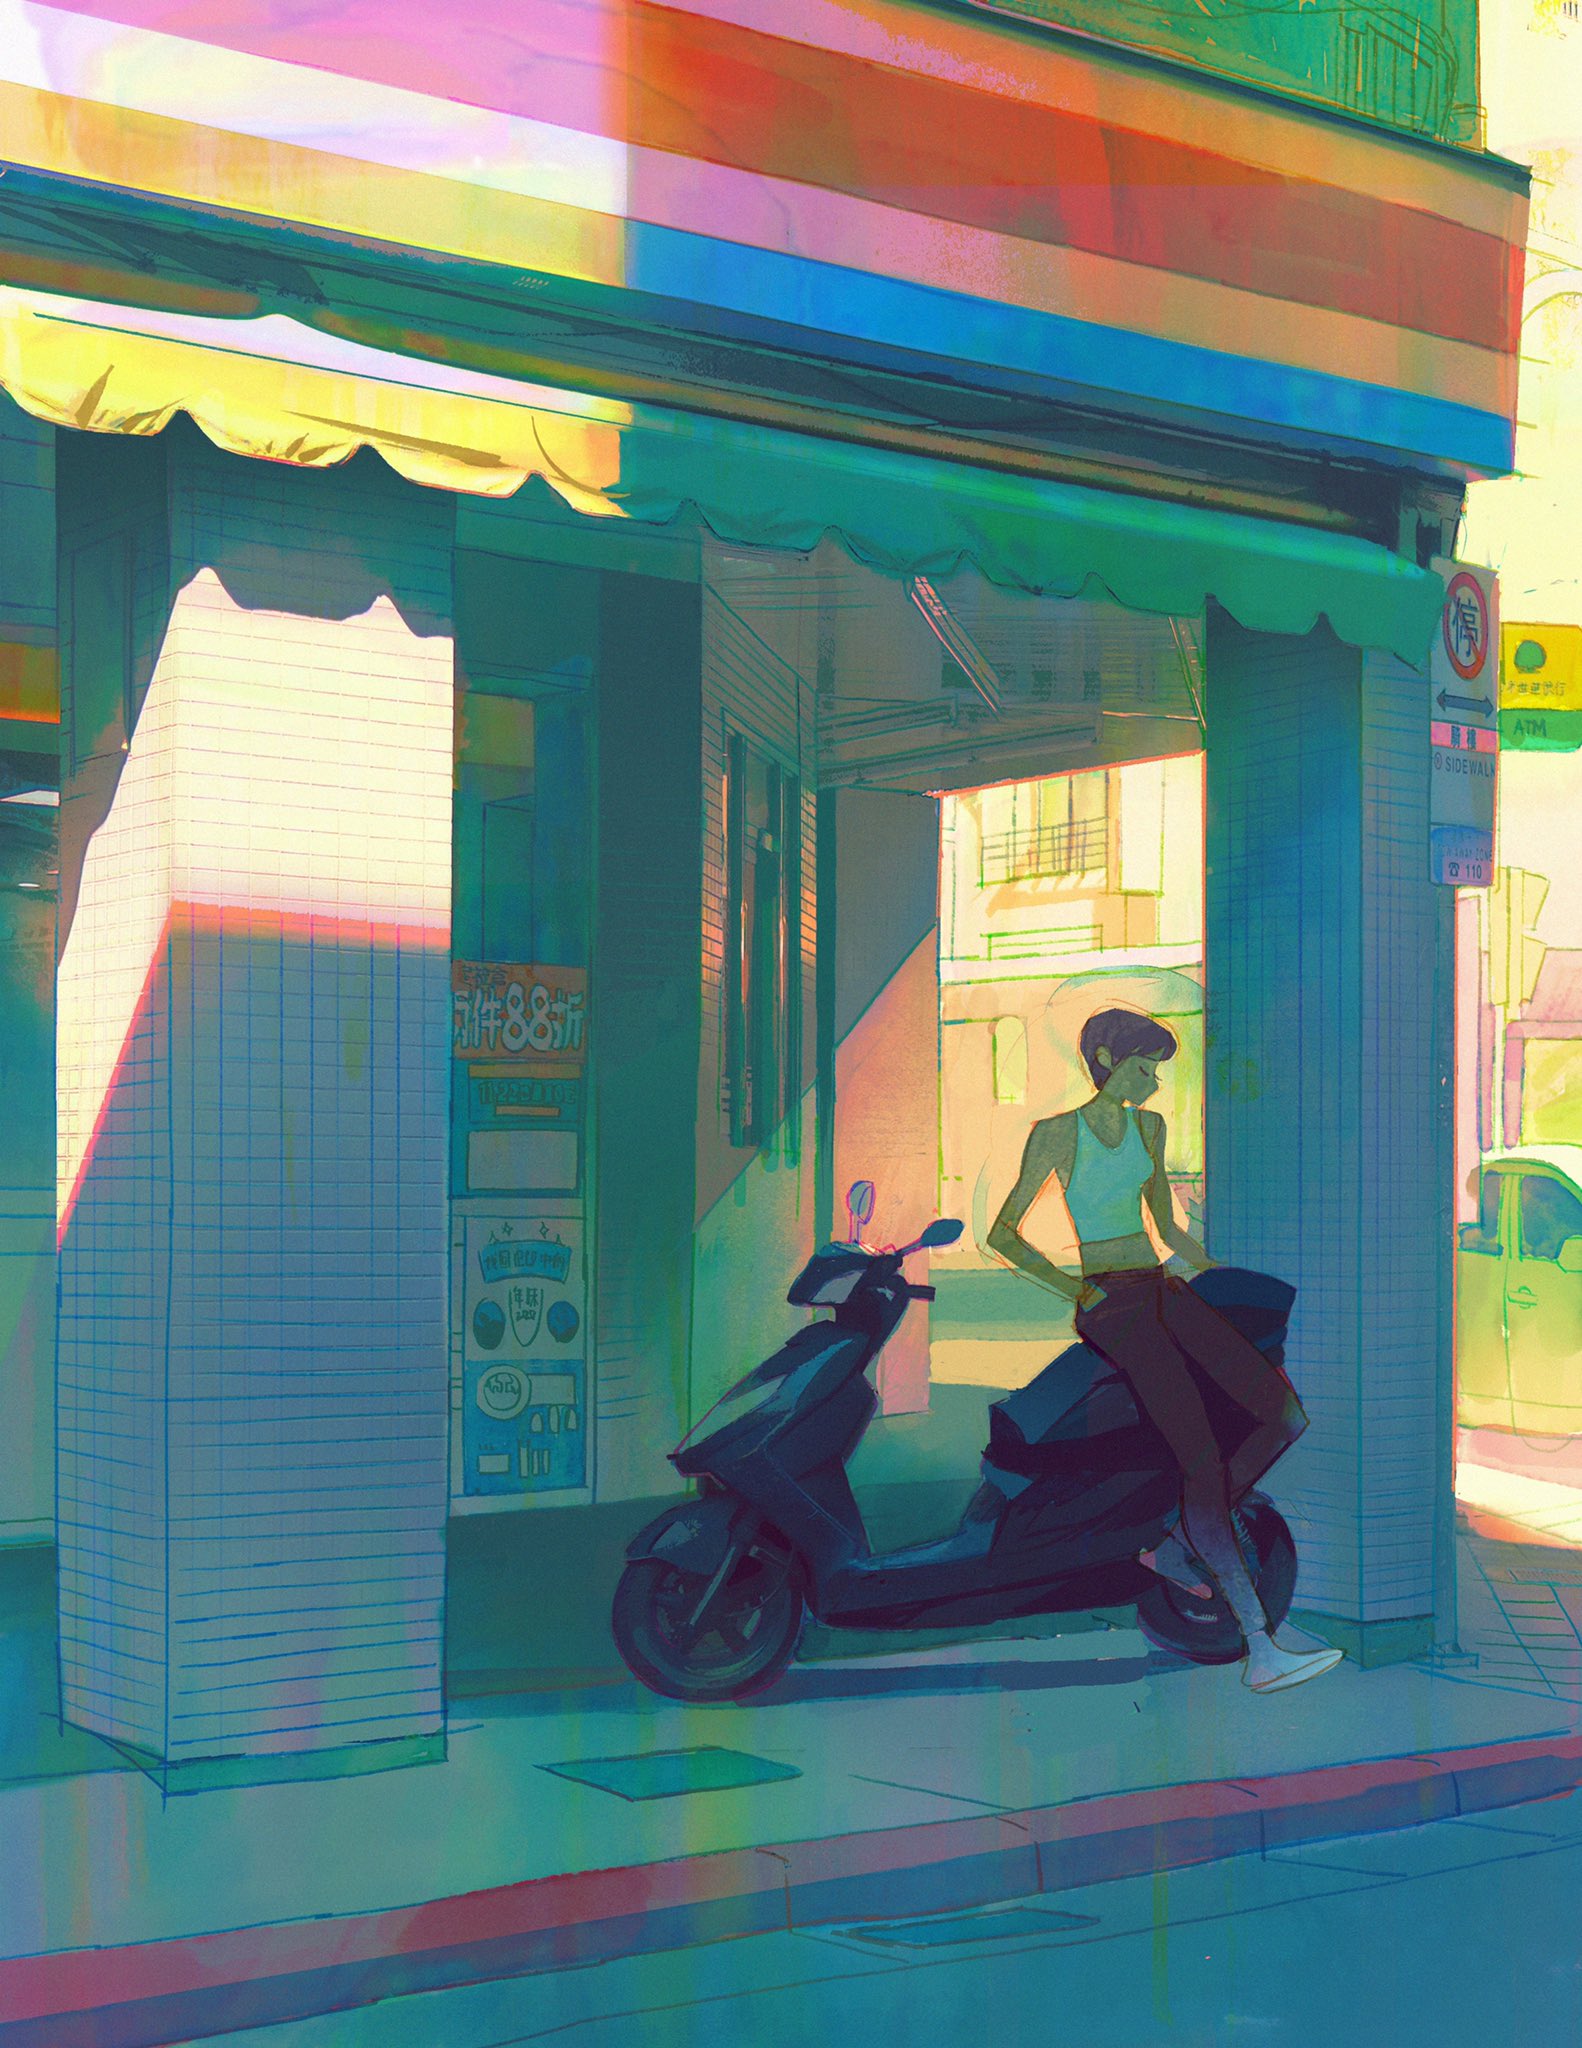 Street Corner by Kat Tsai. A femme figure leans against a parked motorized scooter in front of a 7-11's covered storefront.